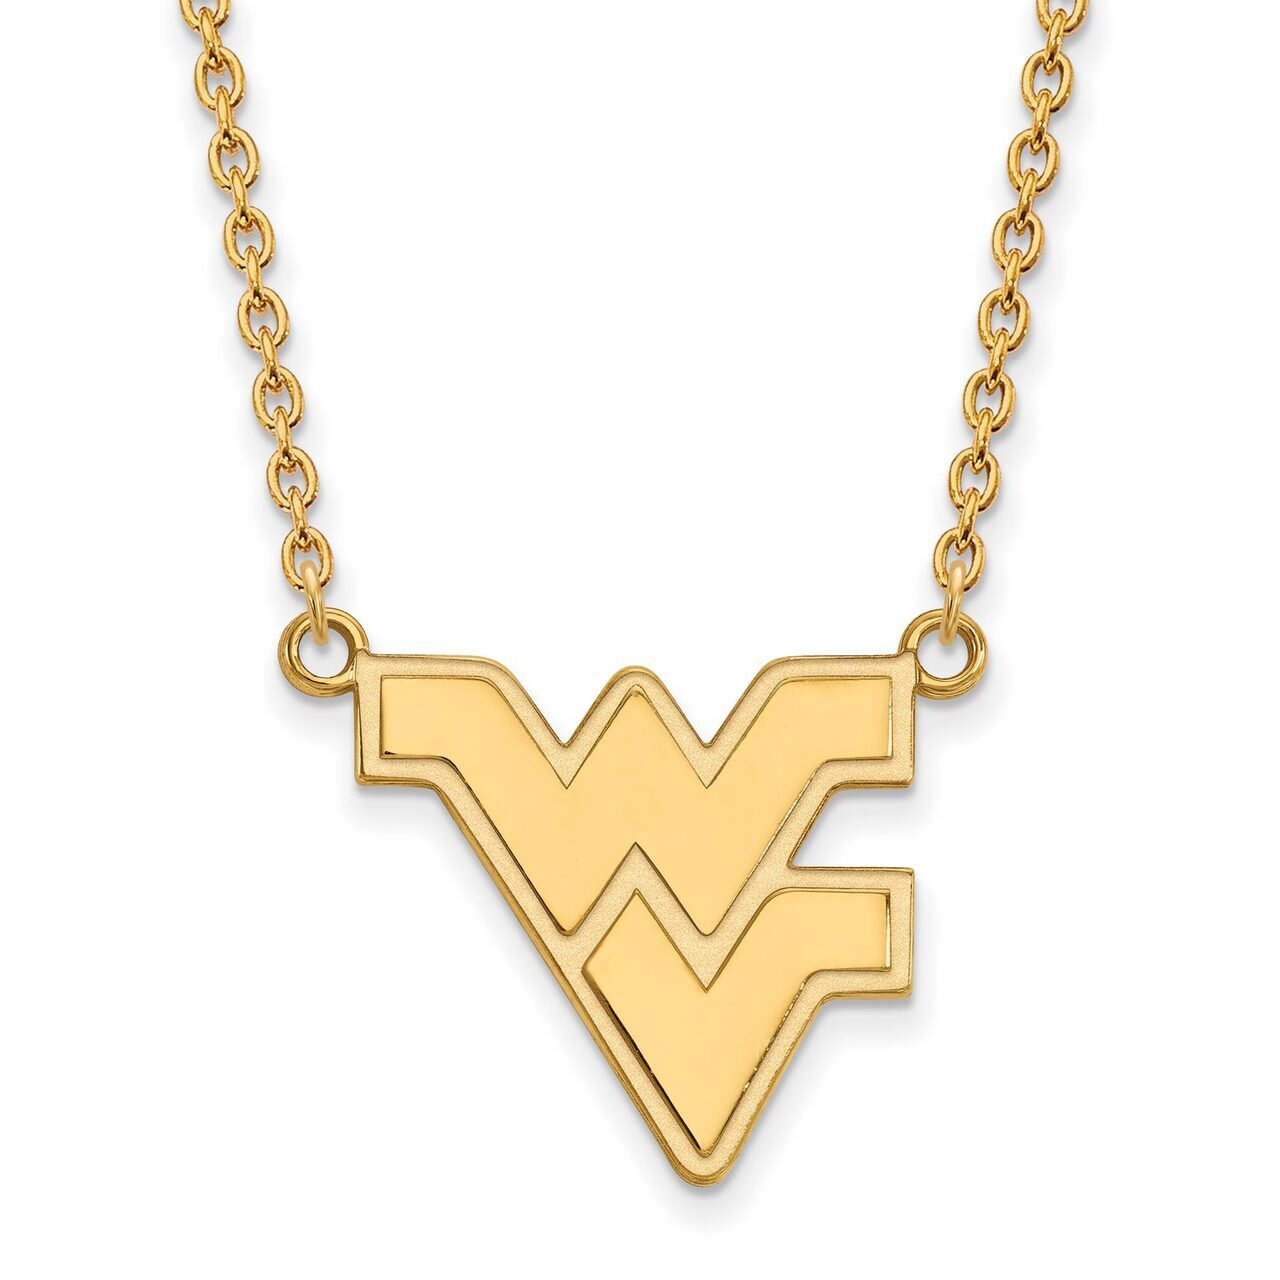 West Virginia University Large Pendant with Chain Necklace 14k Yellow Gold 4Y016WVU-18